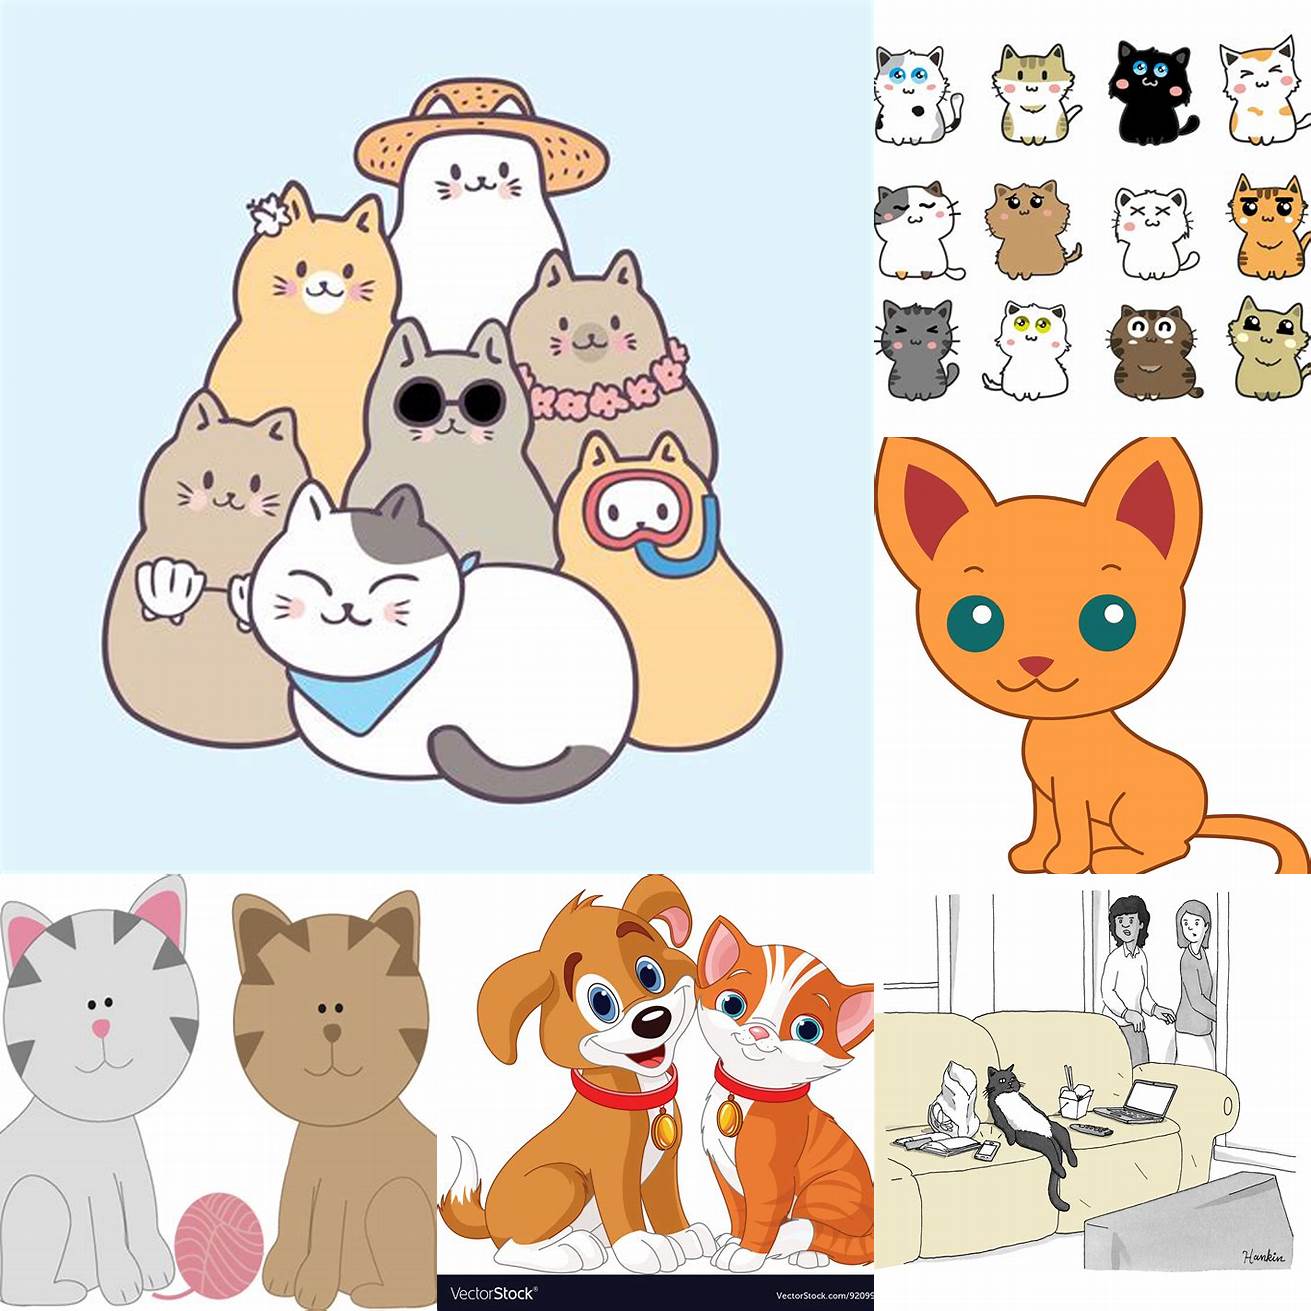 Share Cartoon Cats Phone Number with your friends and family who are also cat lovers